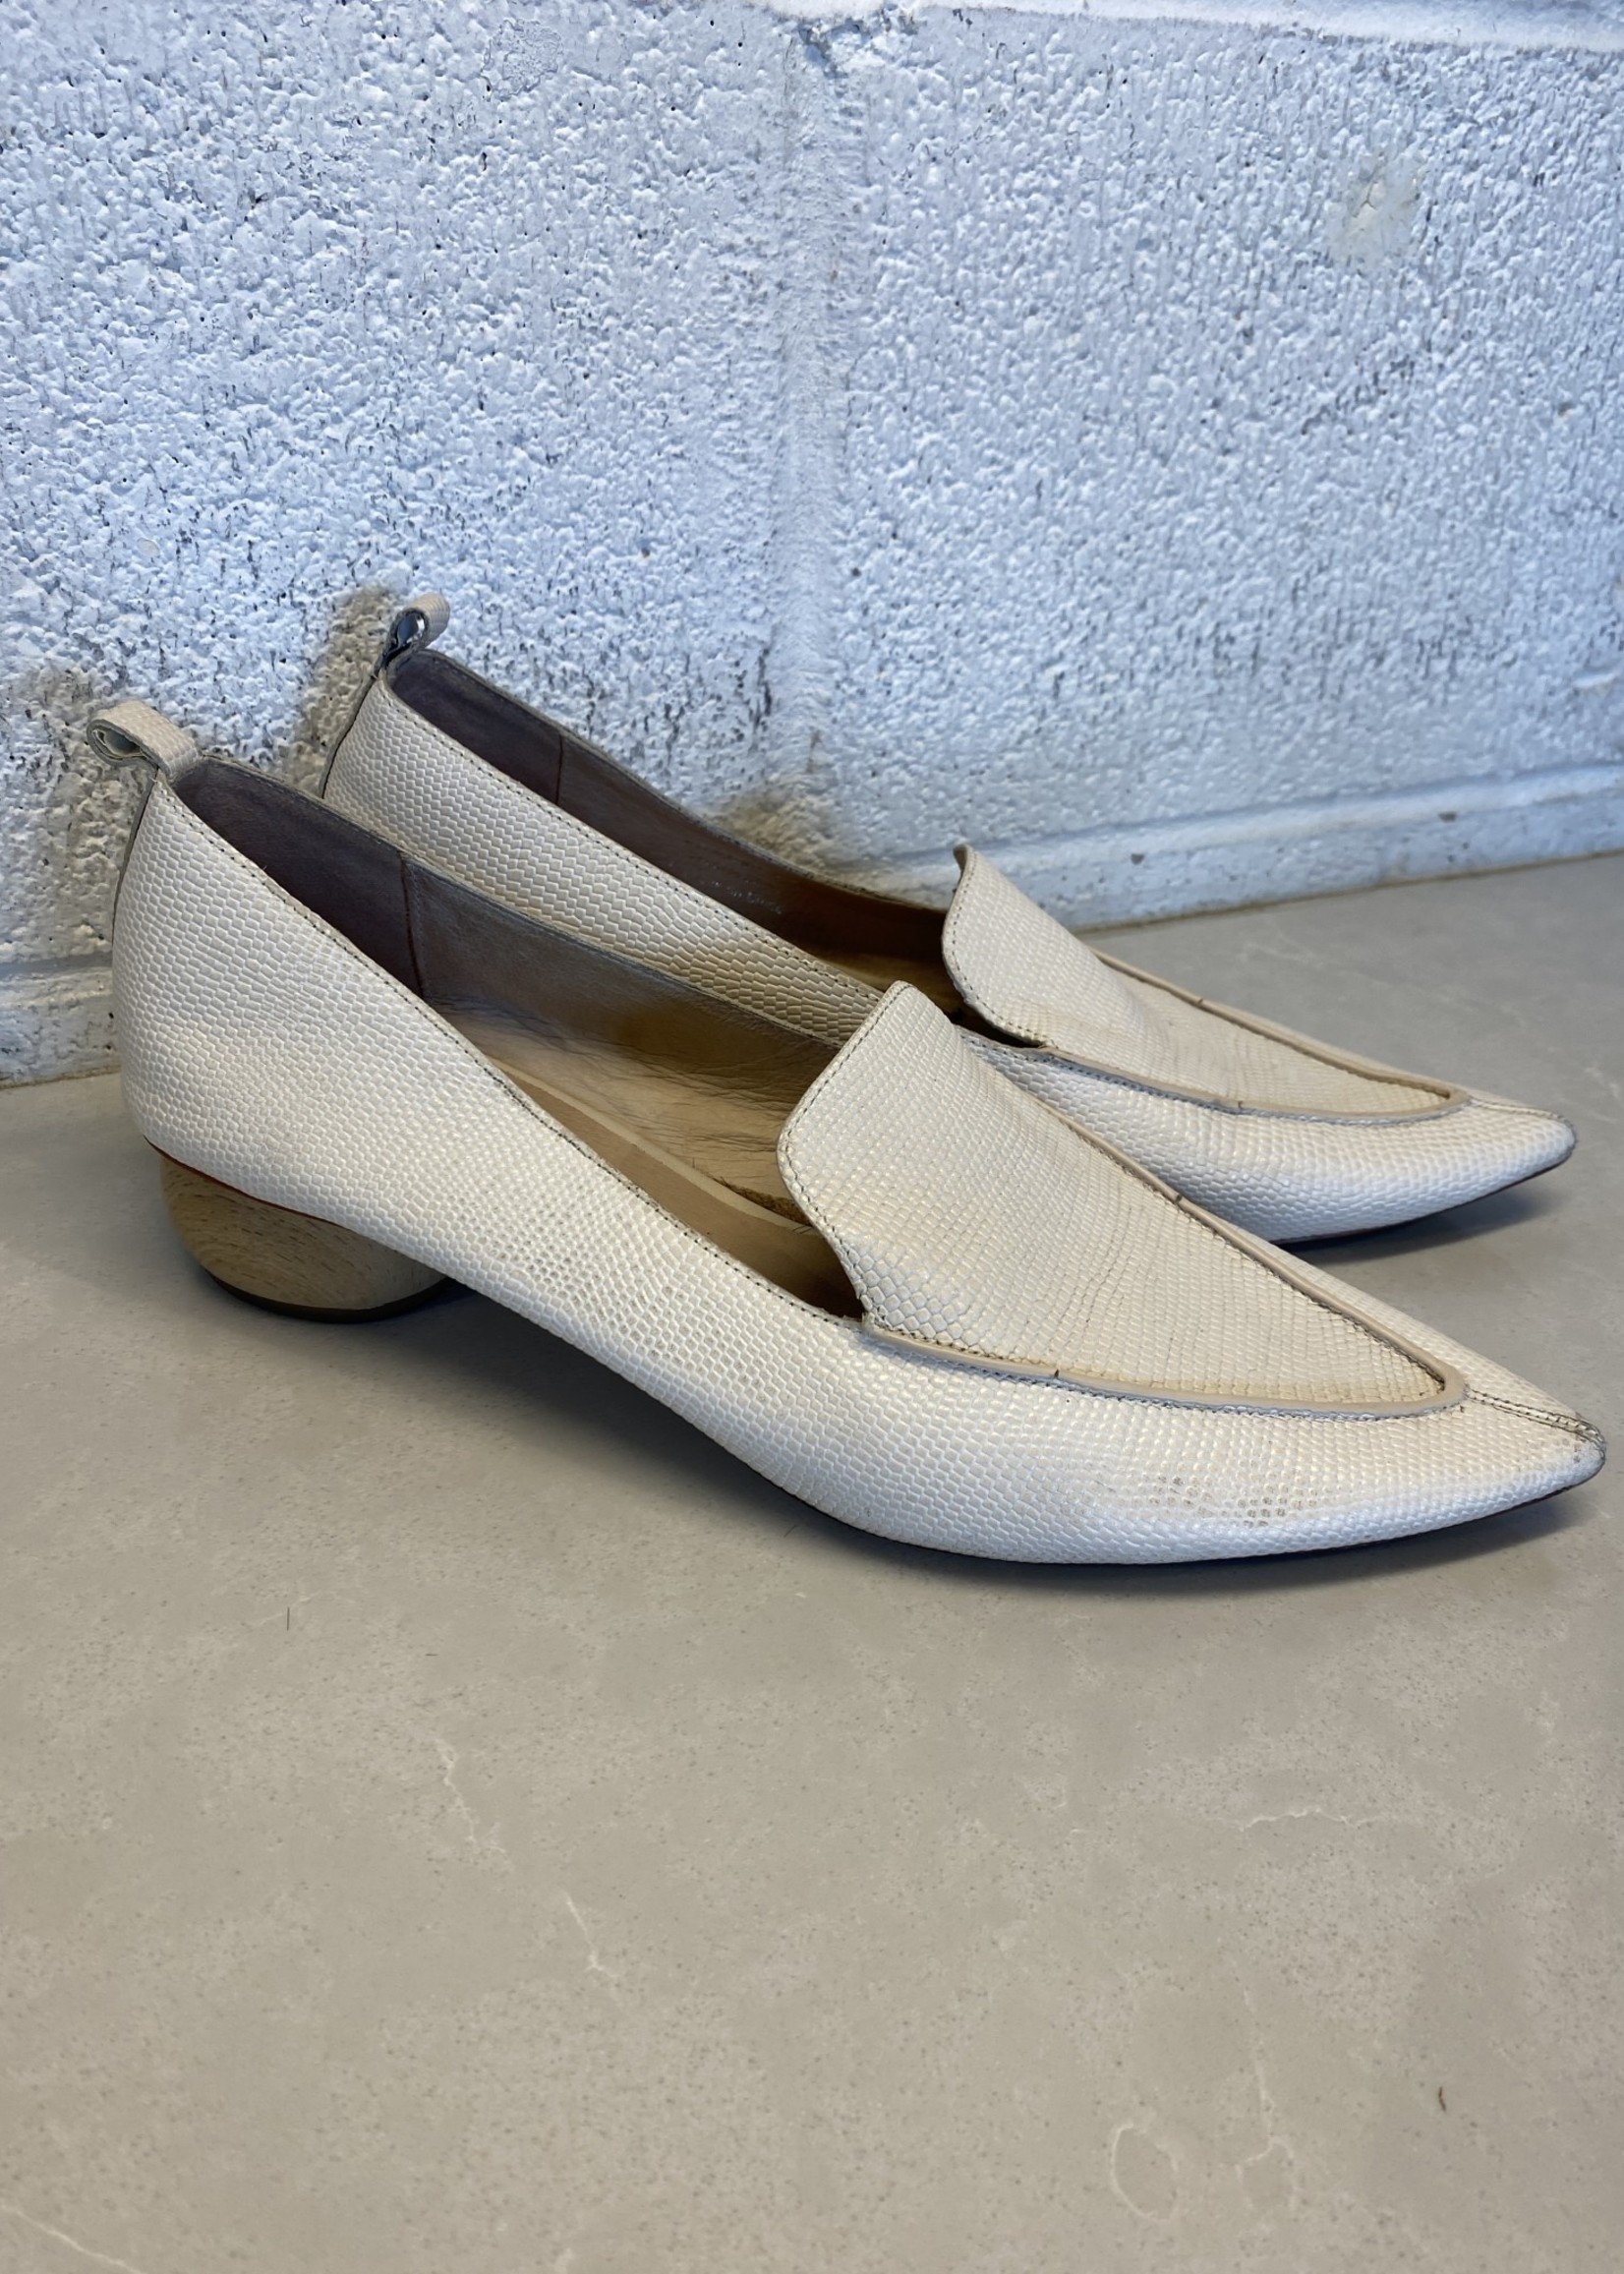 Jeffrey Campbell White Point Toe Loafers 9.5